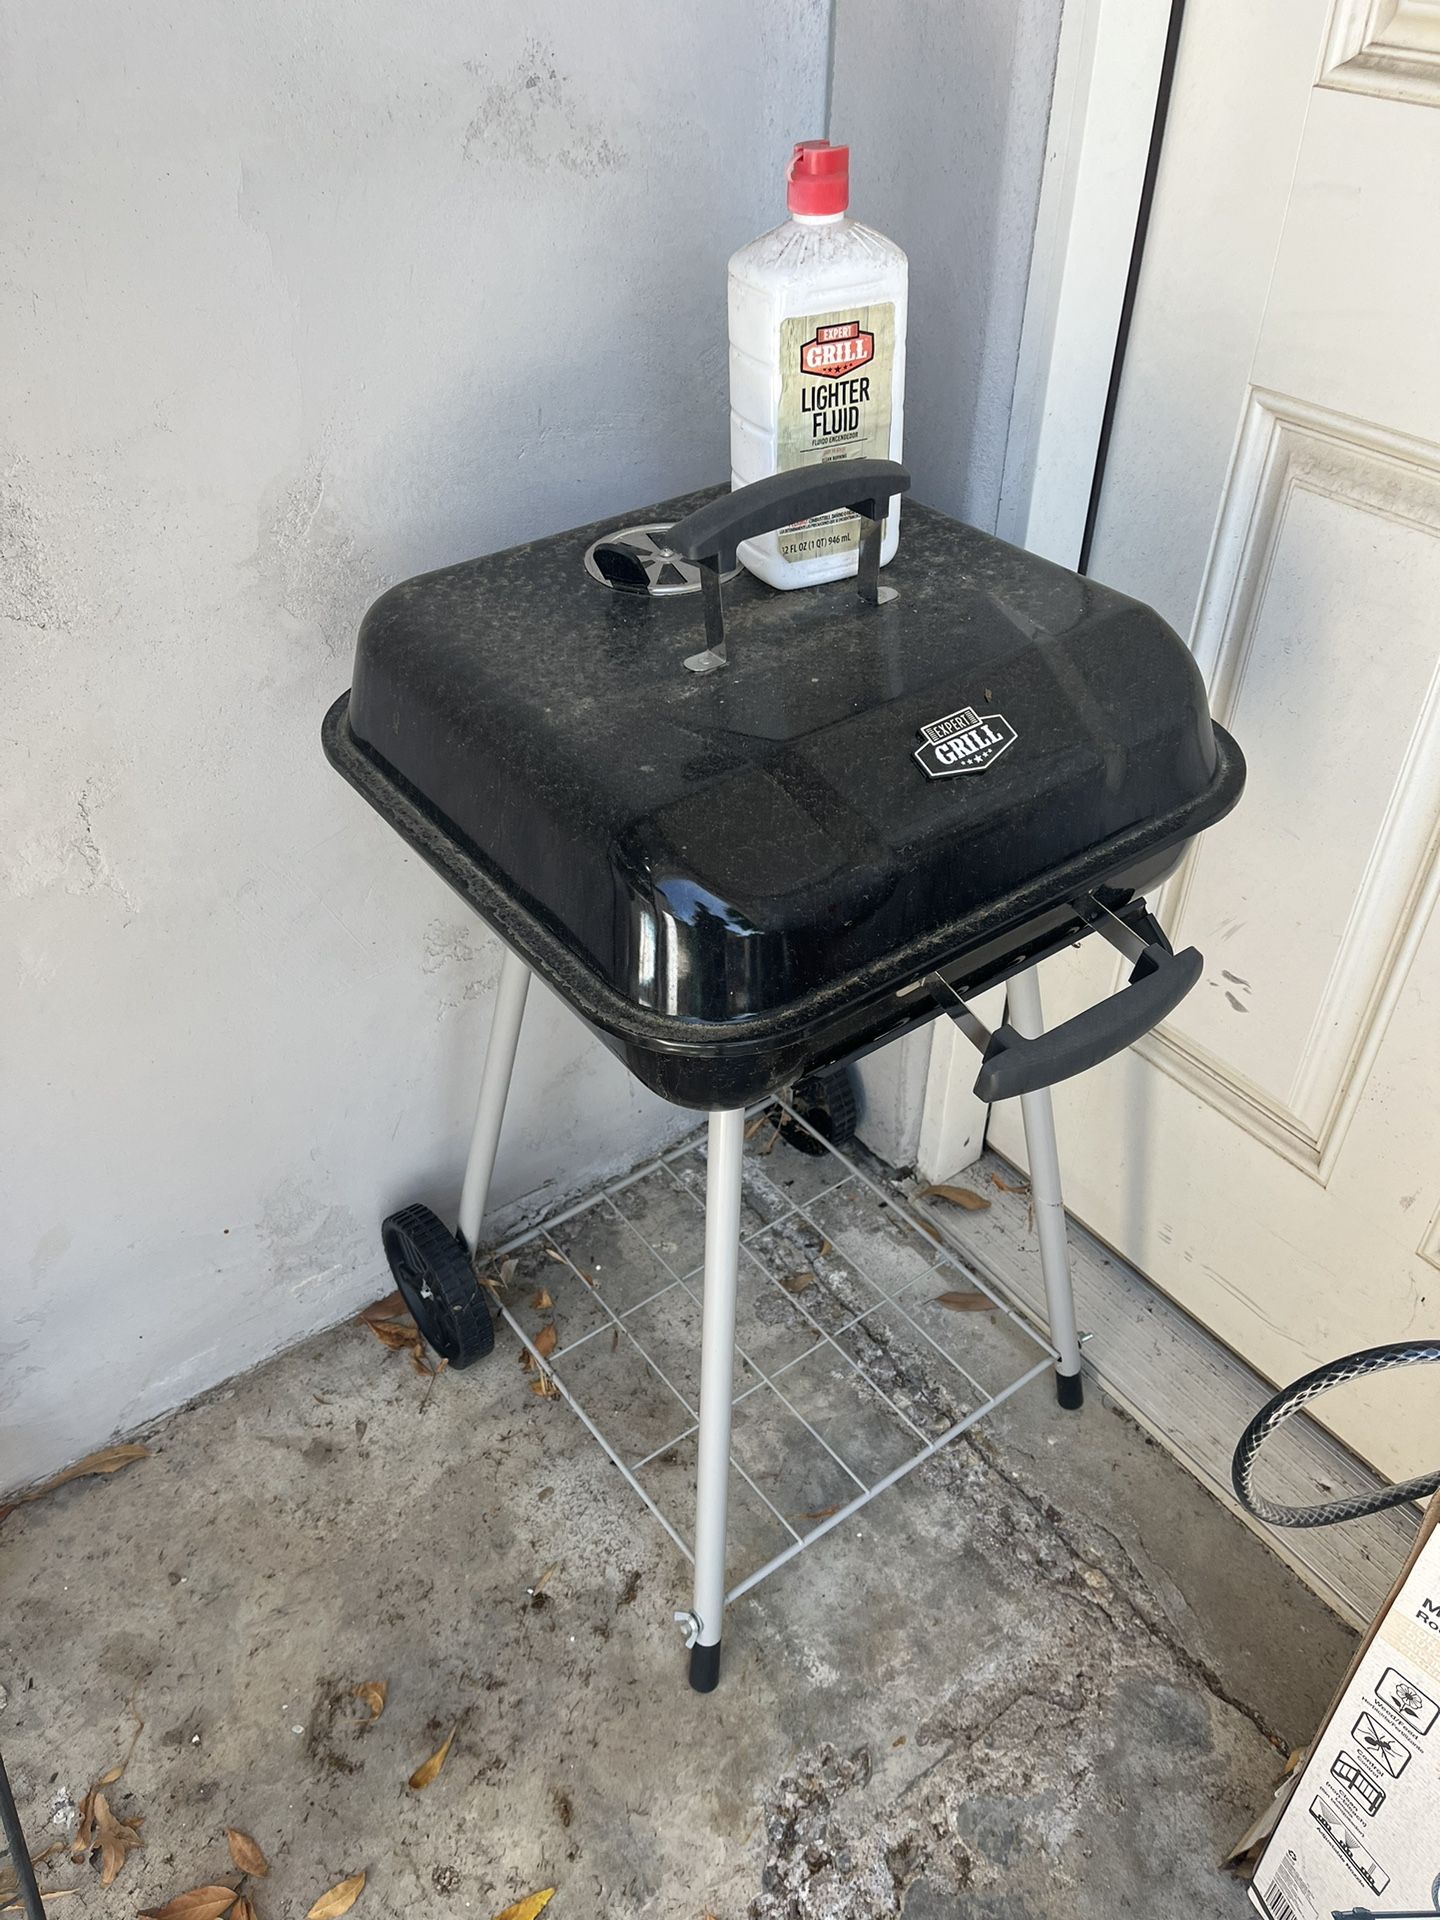 15" Charcoal Grill from Walmart